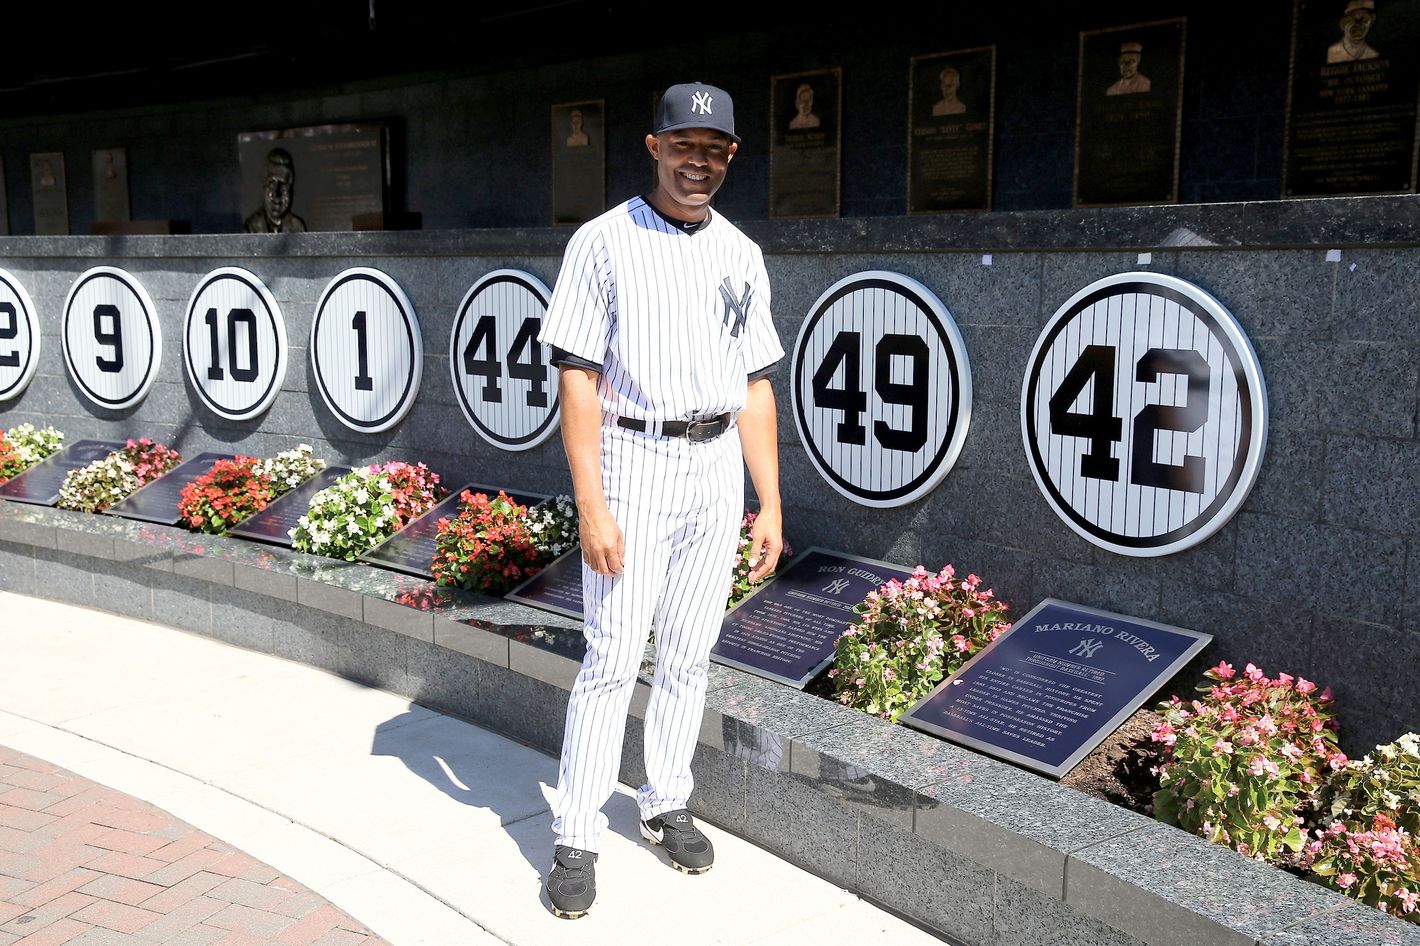 Yankees retired numbers and the baseball legends who wore them